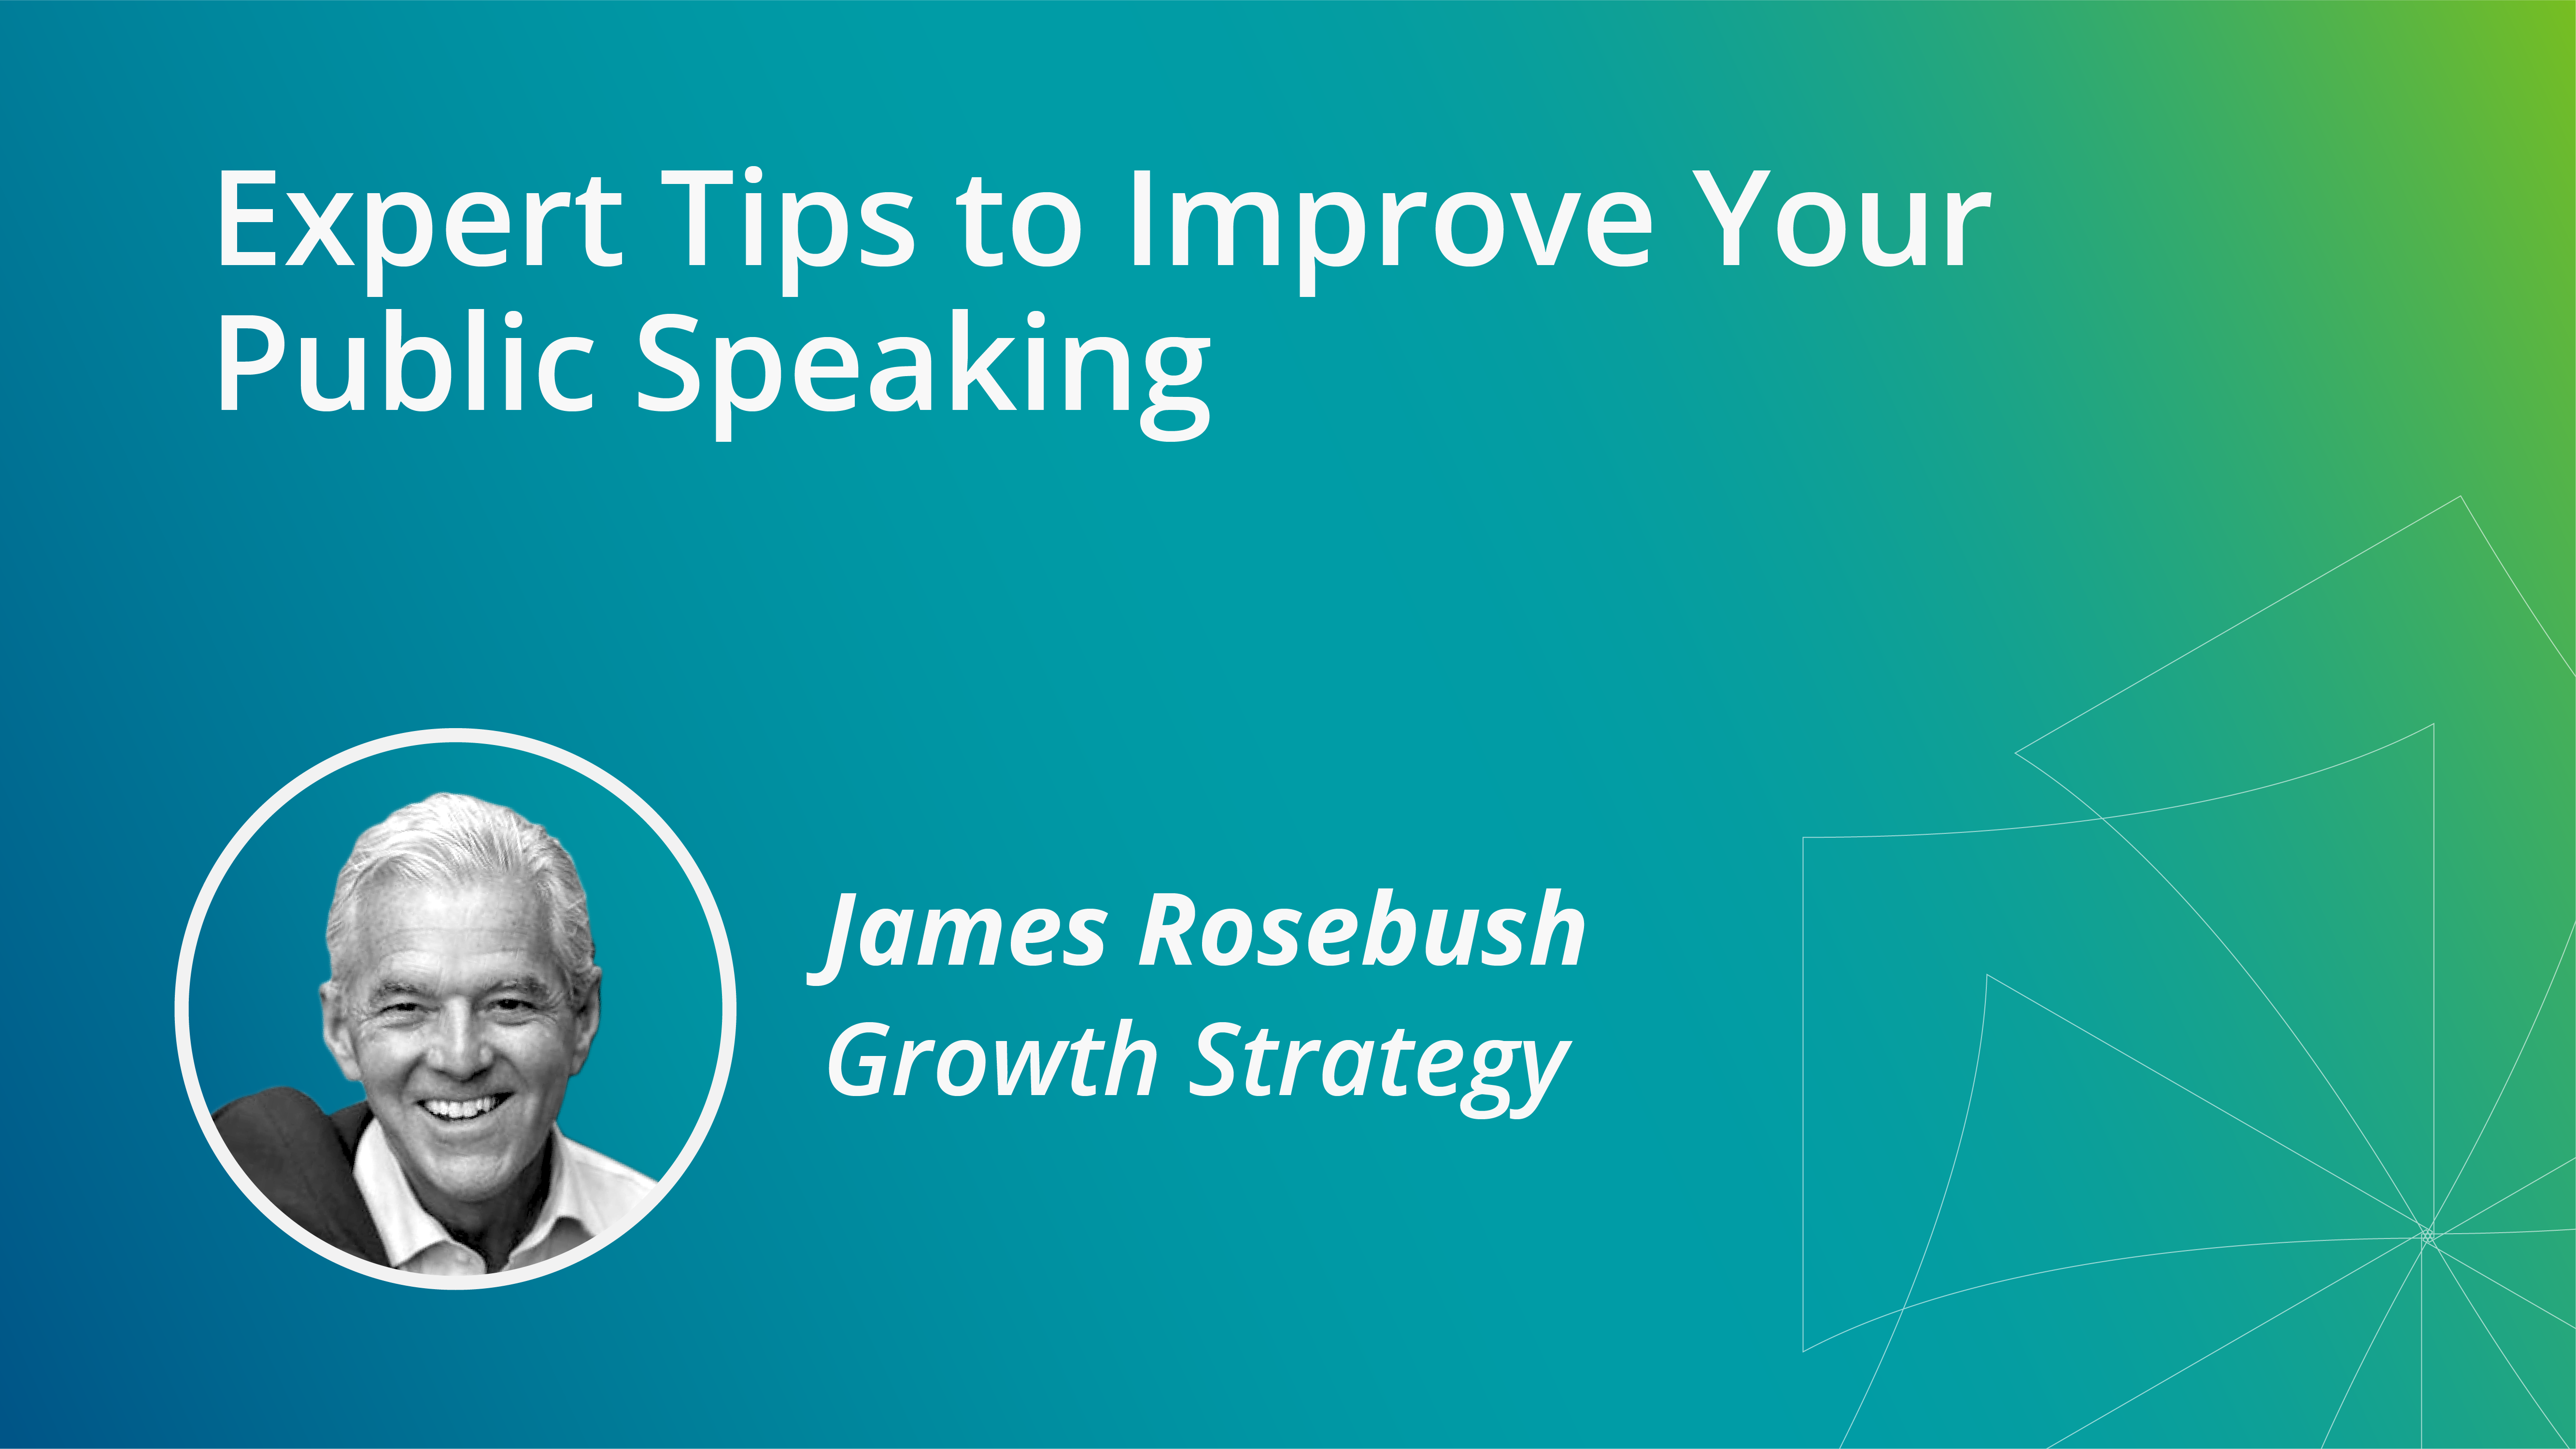 Expert Tips to Improve Your Public Speaking